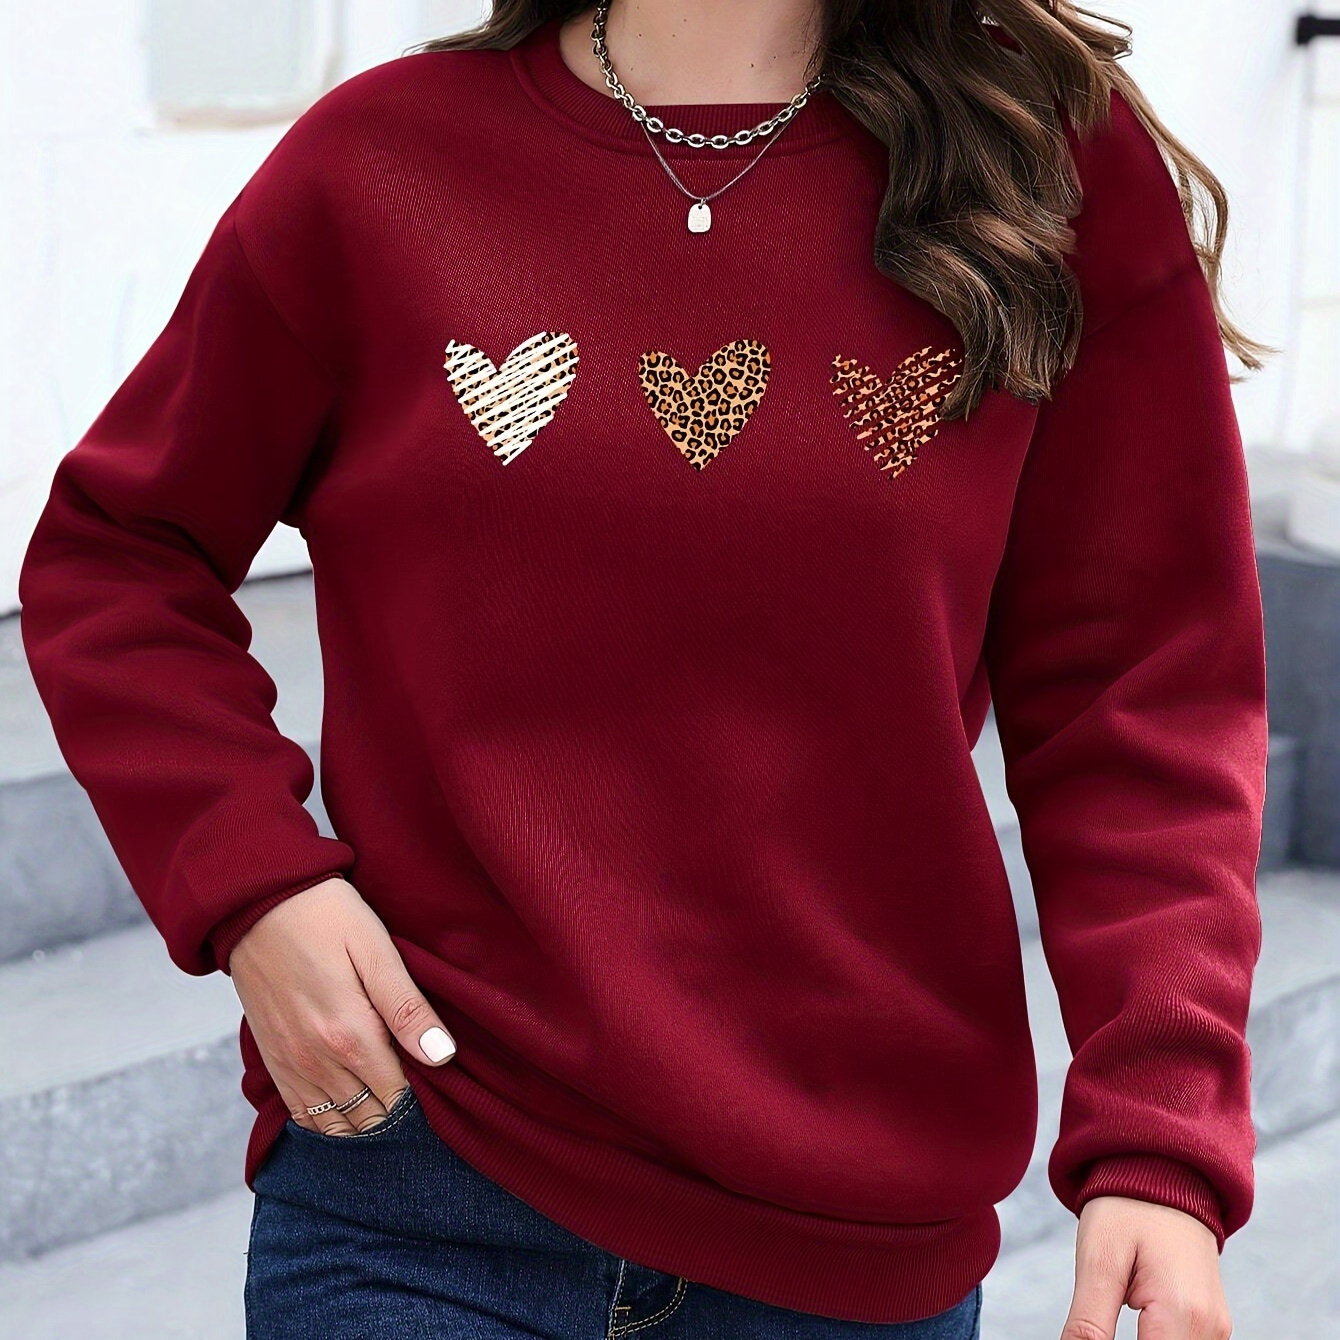 

Women's Long Sleeve Crew Neck Sweatshirt With Leopard Print Hearts, Plush Lined Warm Casual Pullover, Basic Style